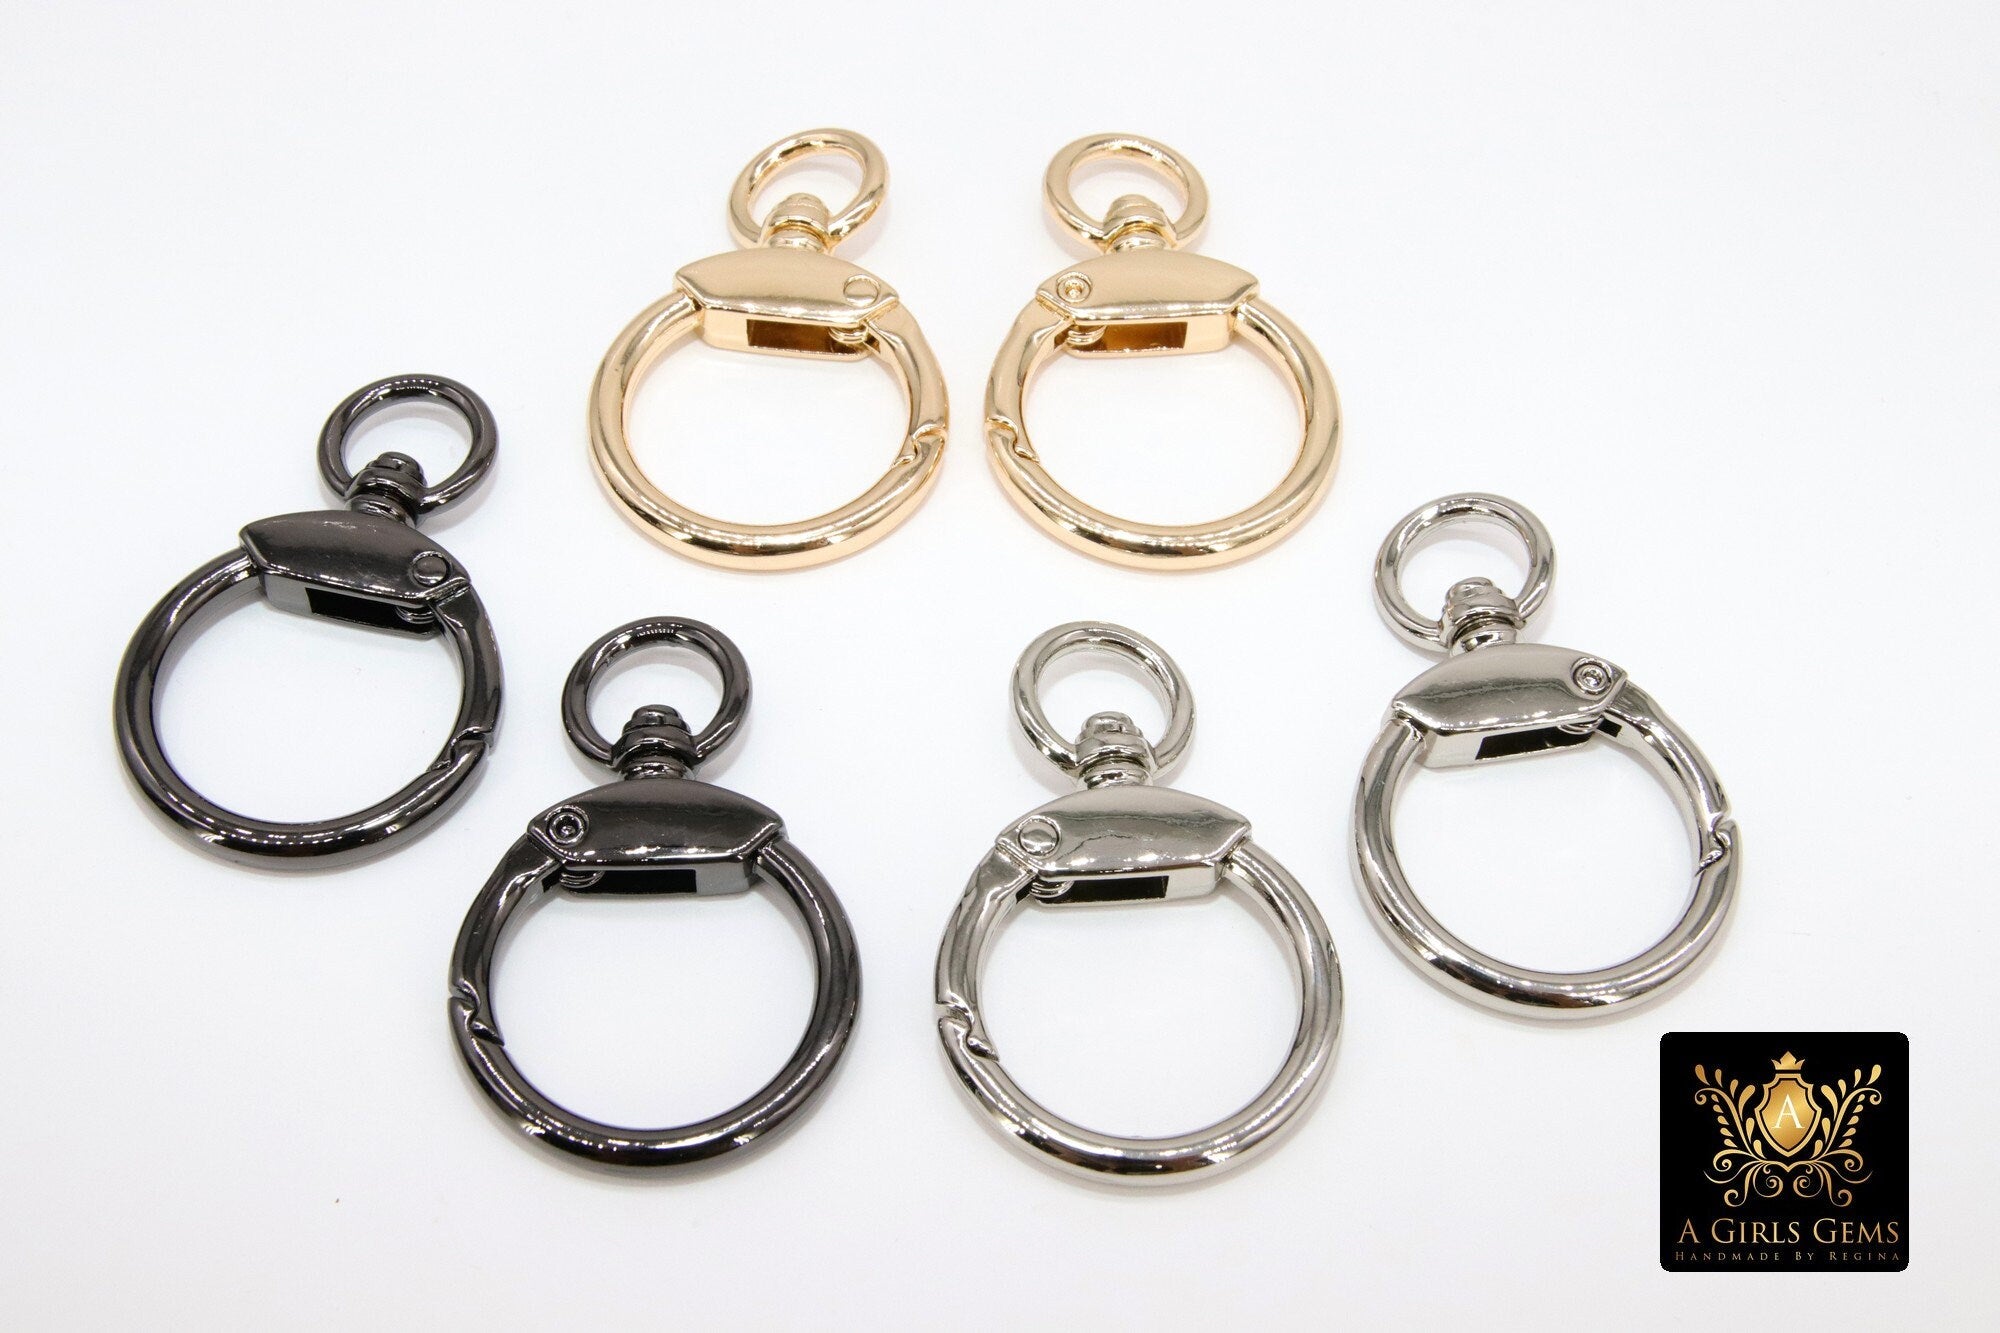 Gold Swivel Spring Gate Clasps, Silver or Black Spring Lock Push Clip #2764, Fob Jewelry Findings 29 mm